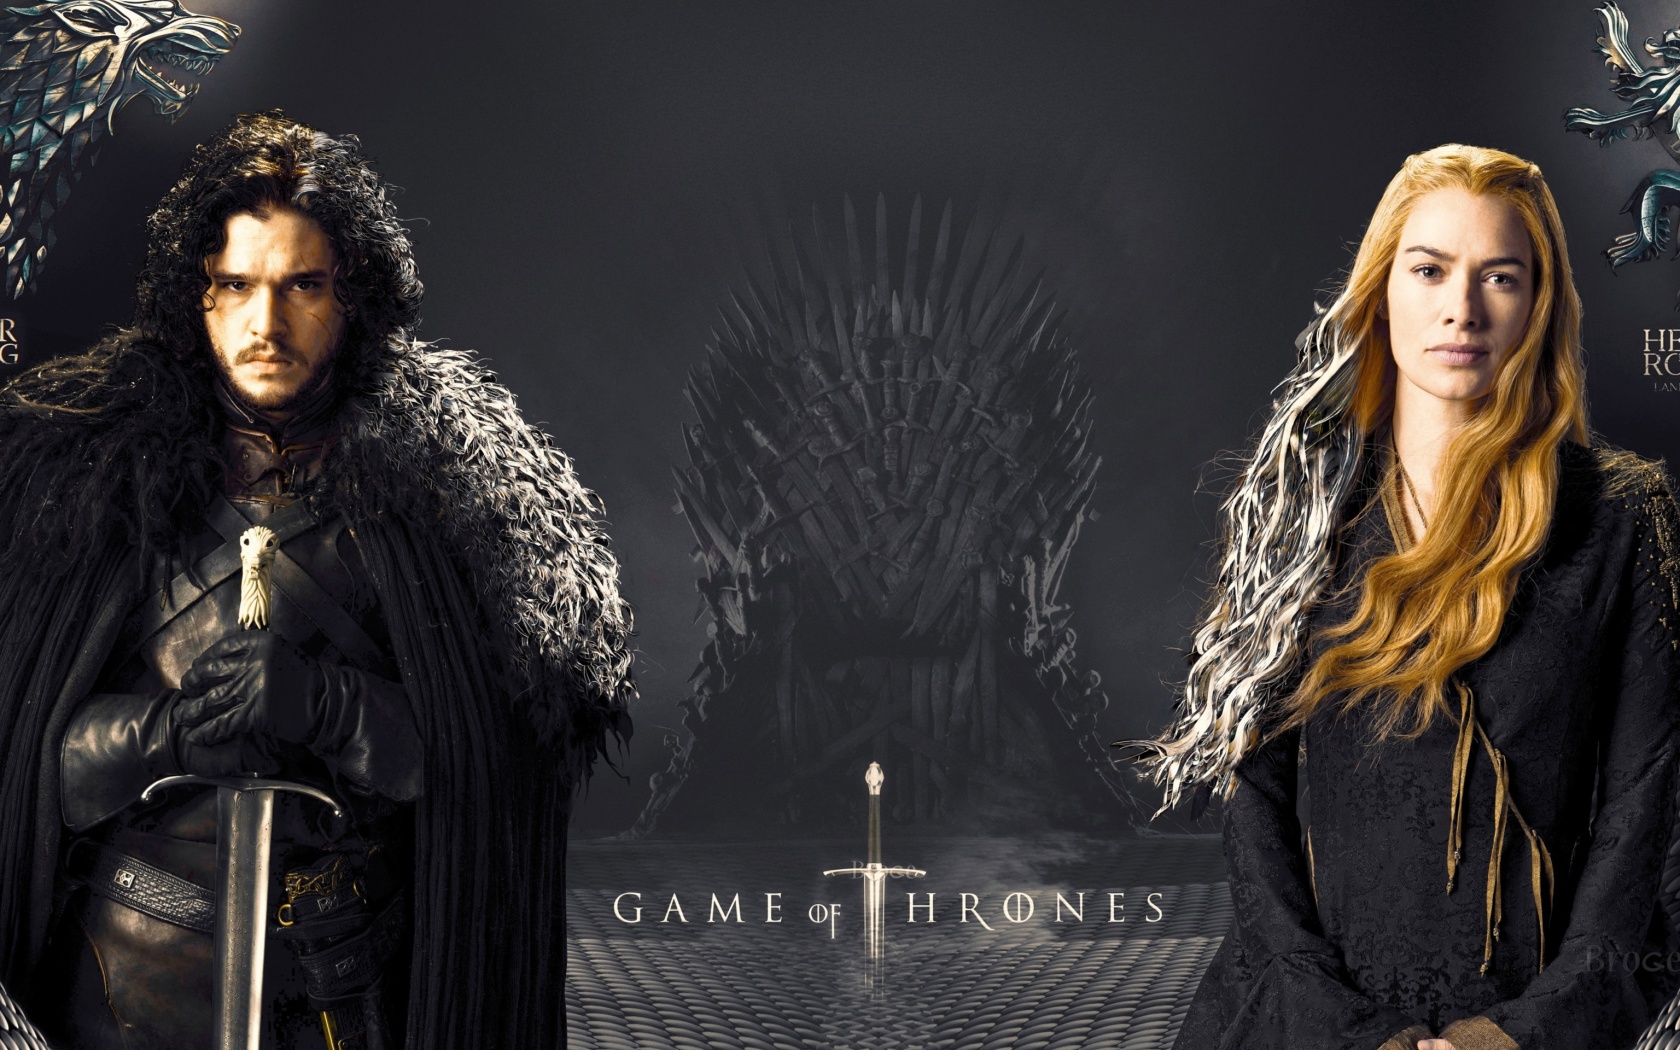 Game Of Thrones actors Jon Snow and Cersei Lannister screenshot #1 1680x1050